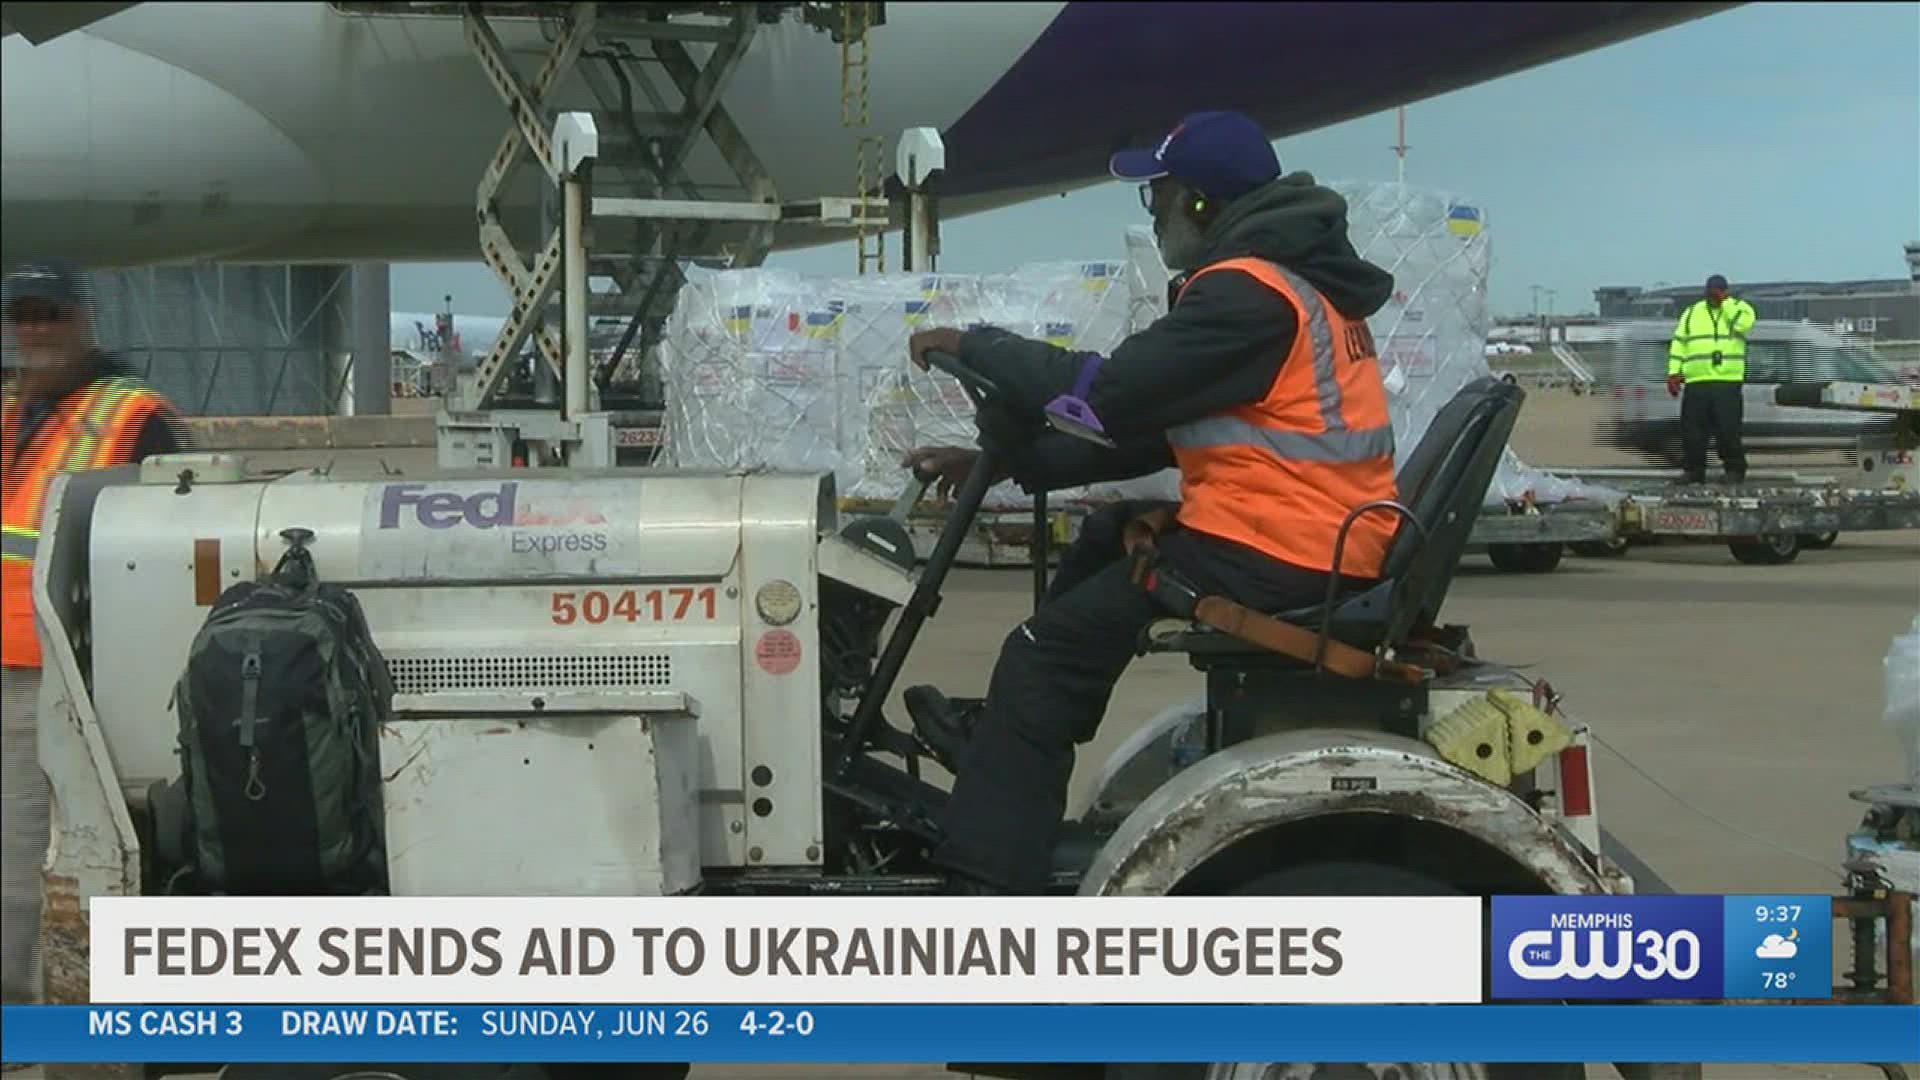 This follows FedEx and Direct Relief's first charter flight of aid for Ukrainian refugees in March.